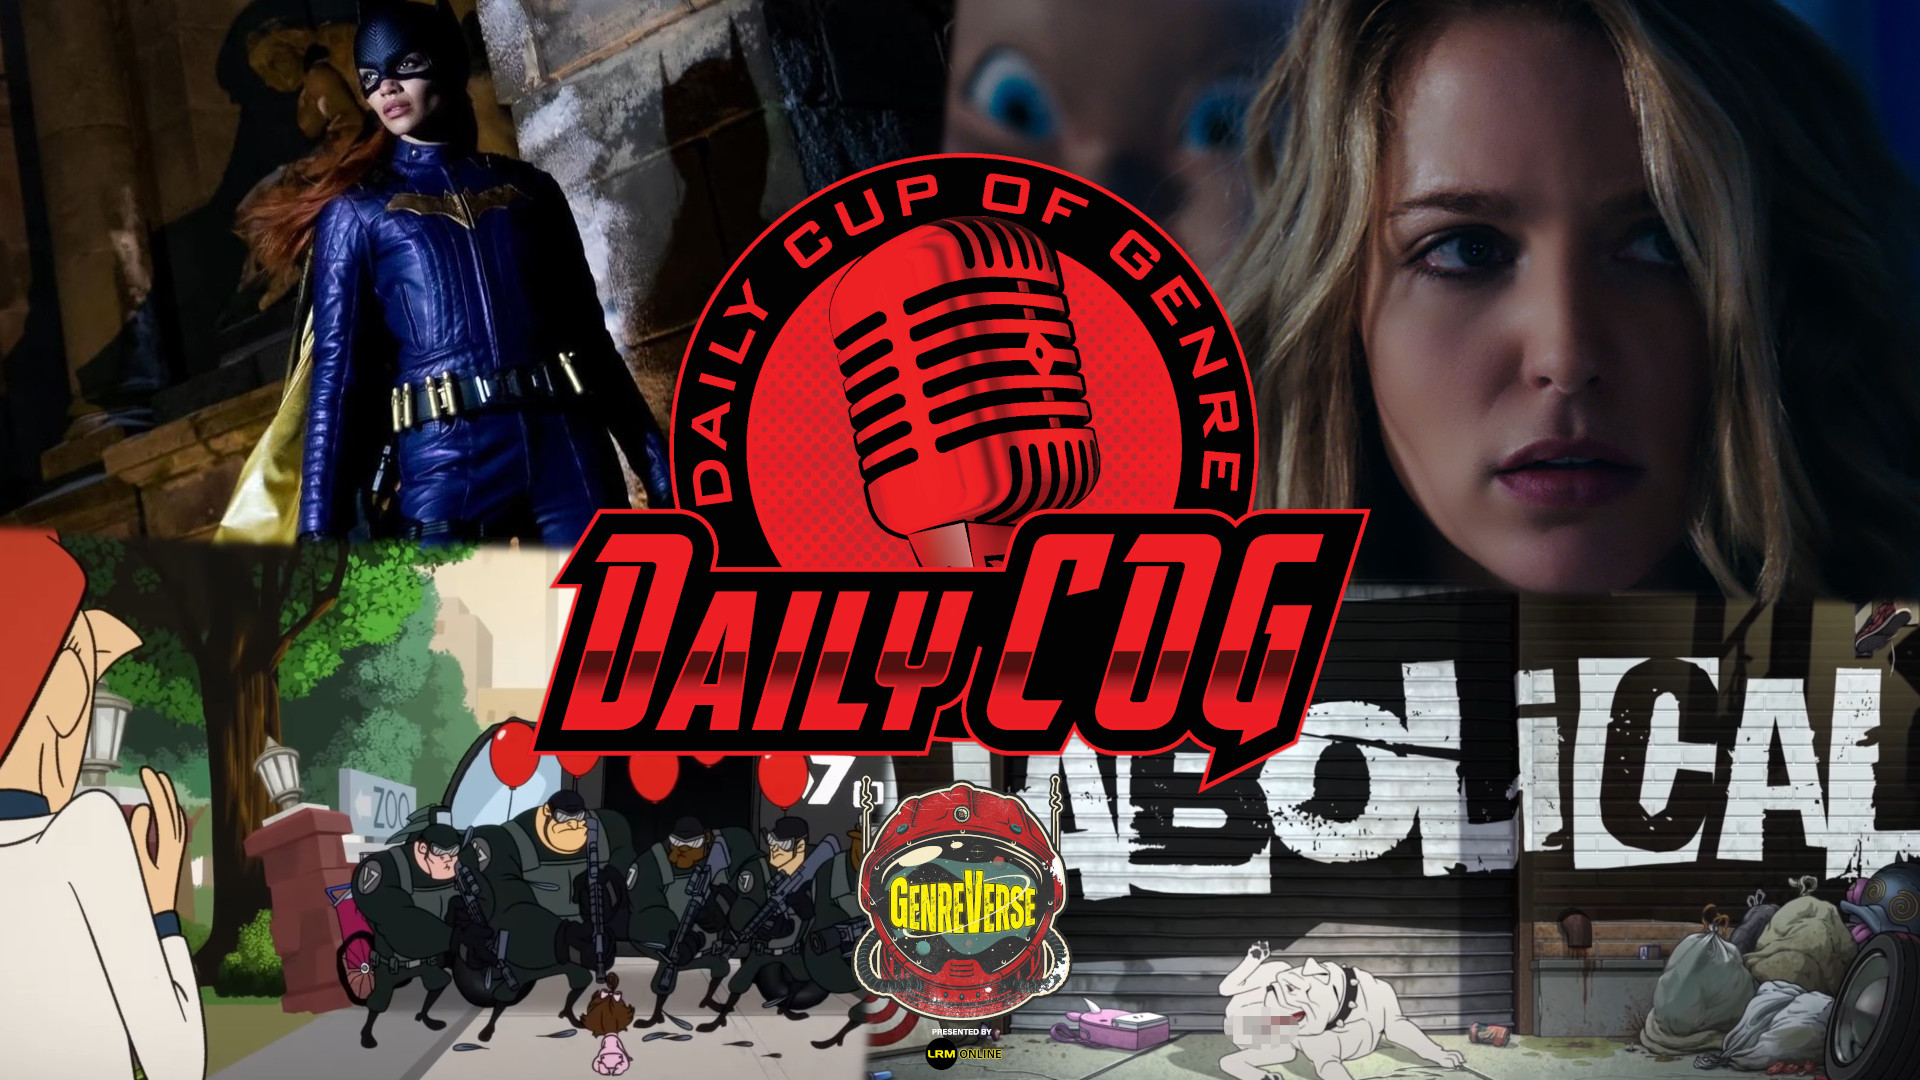 The Boys Presents Diabolical Laser Baby First Look, Jason Blum On Happy Death Day 3, And The Batgirl Costume Controversy Daily COG Video